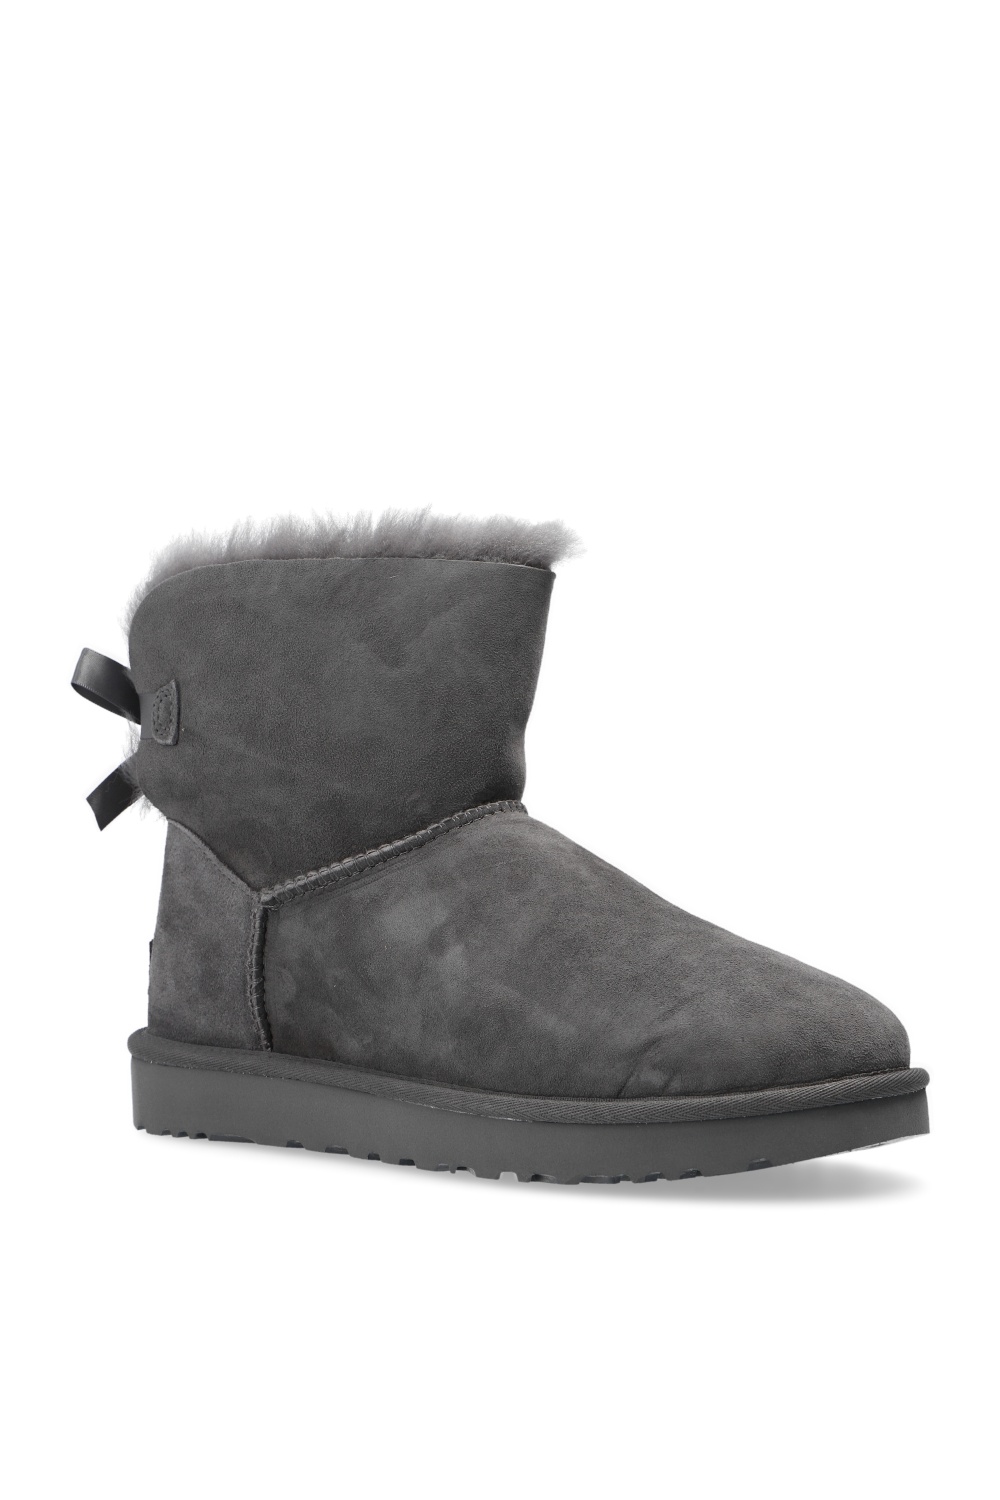 UGG 'W Mini Bailey Bow II' suede snow boots